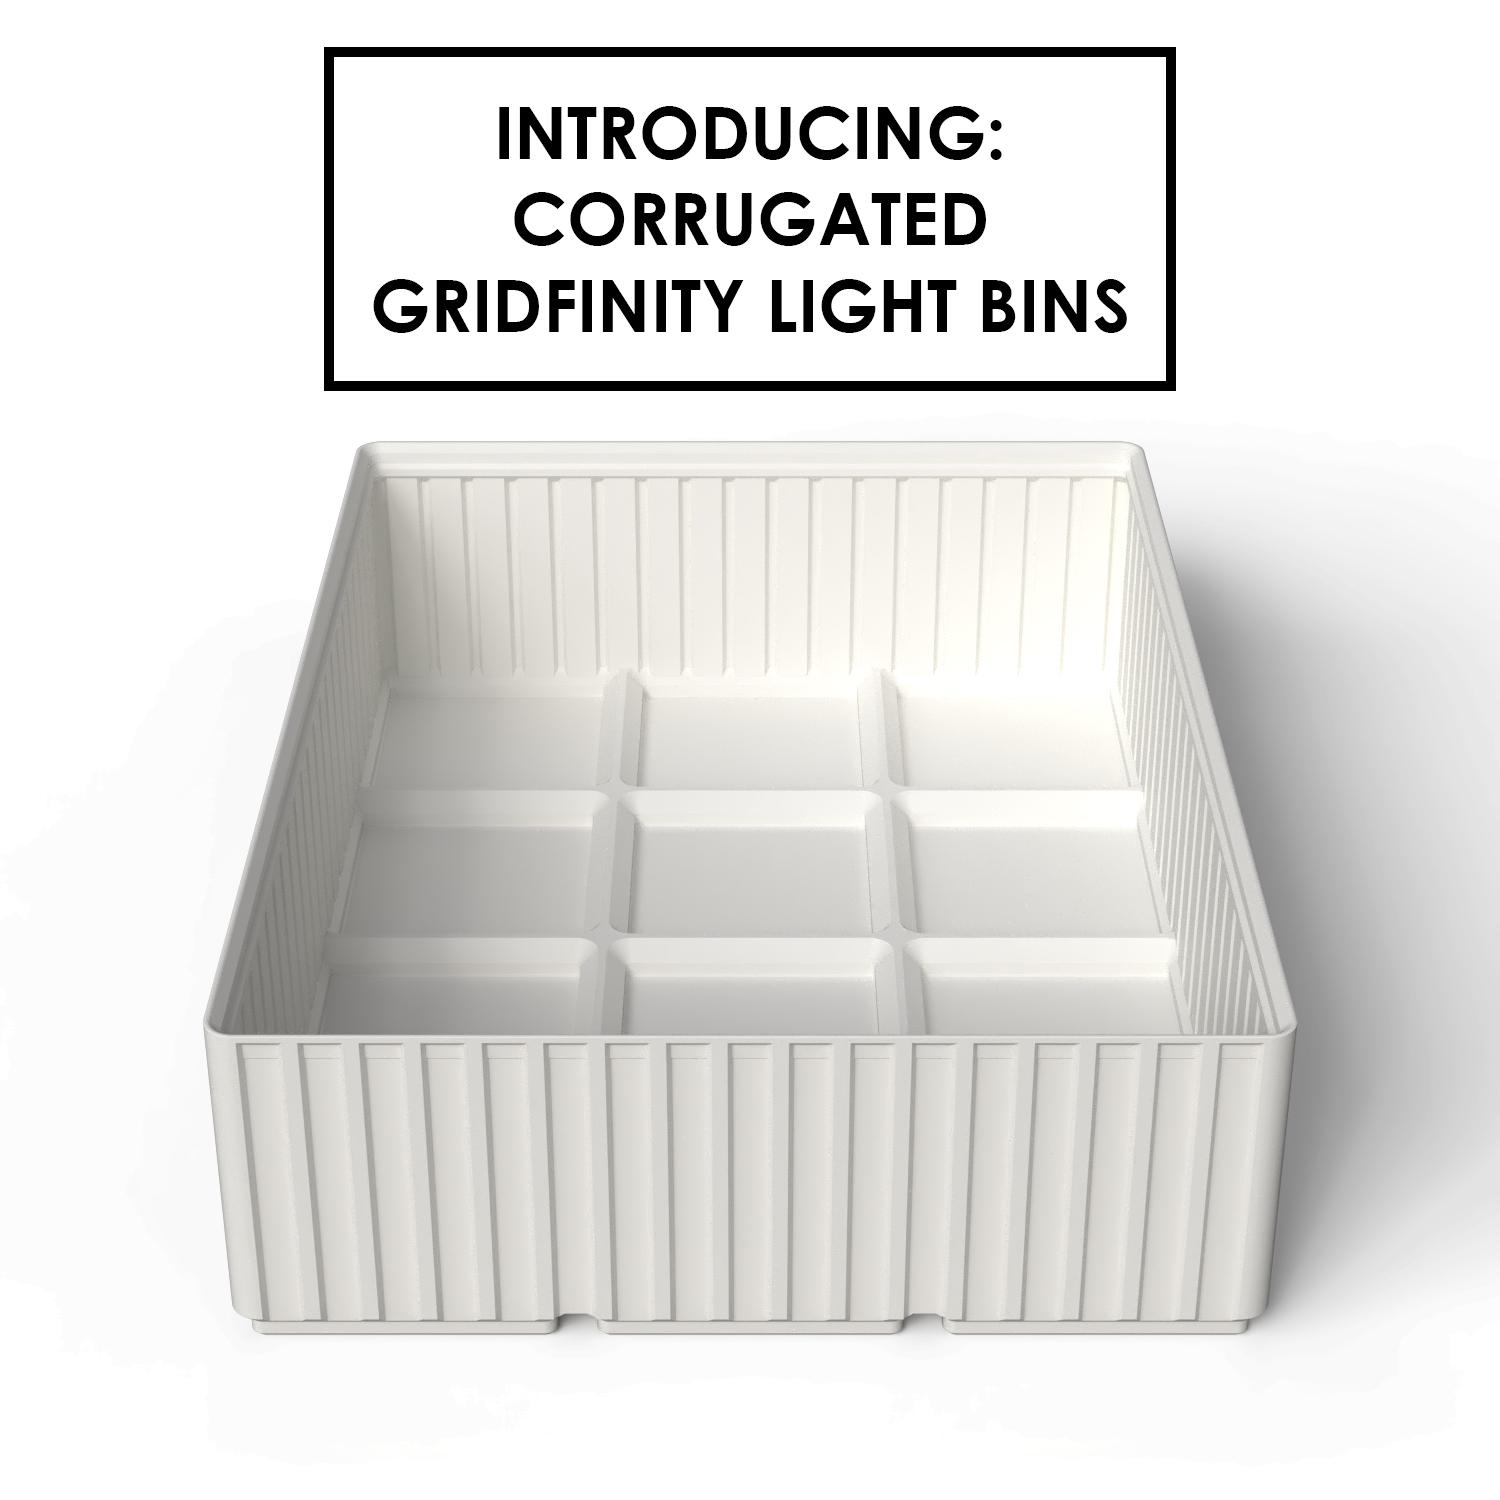 Corrugated Gridfinity Light Bins are here!